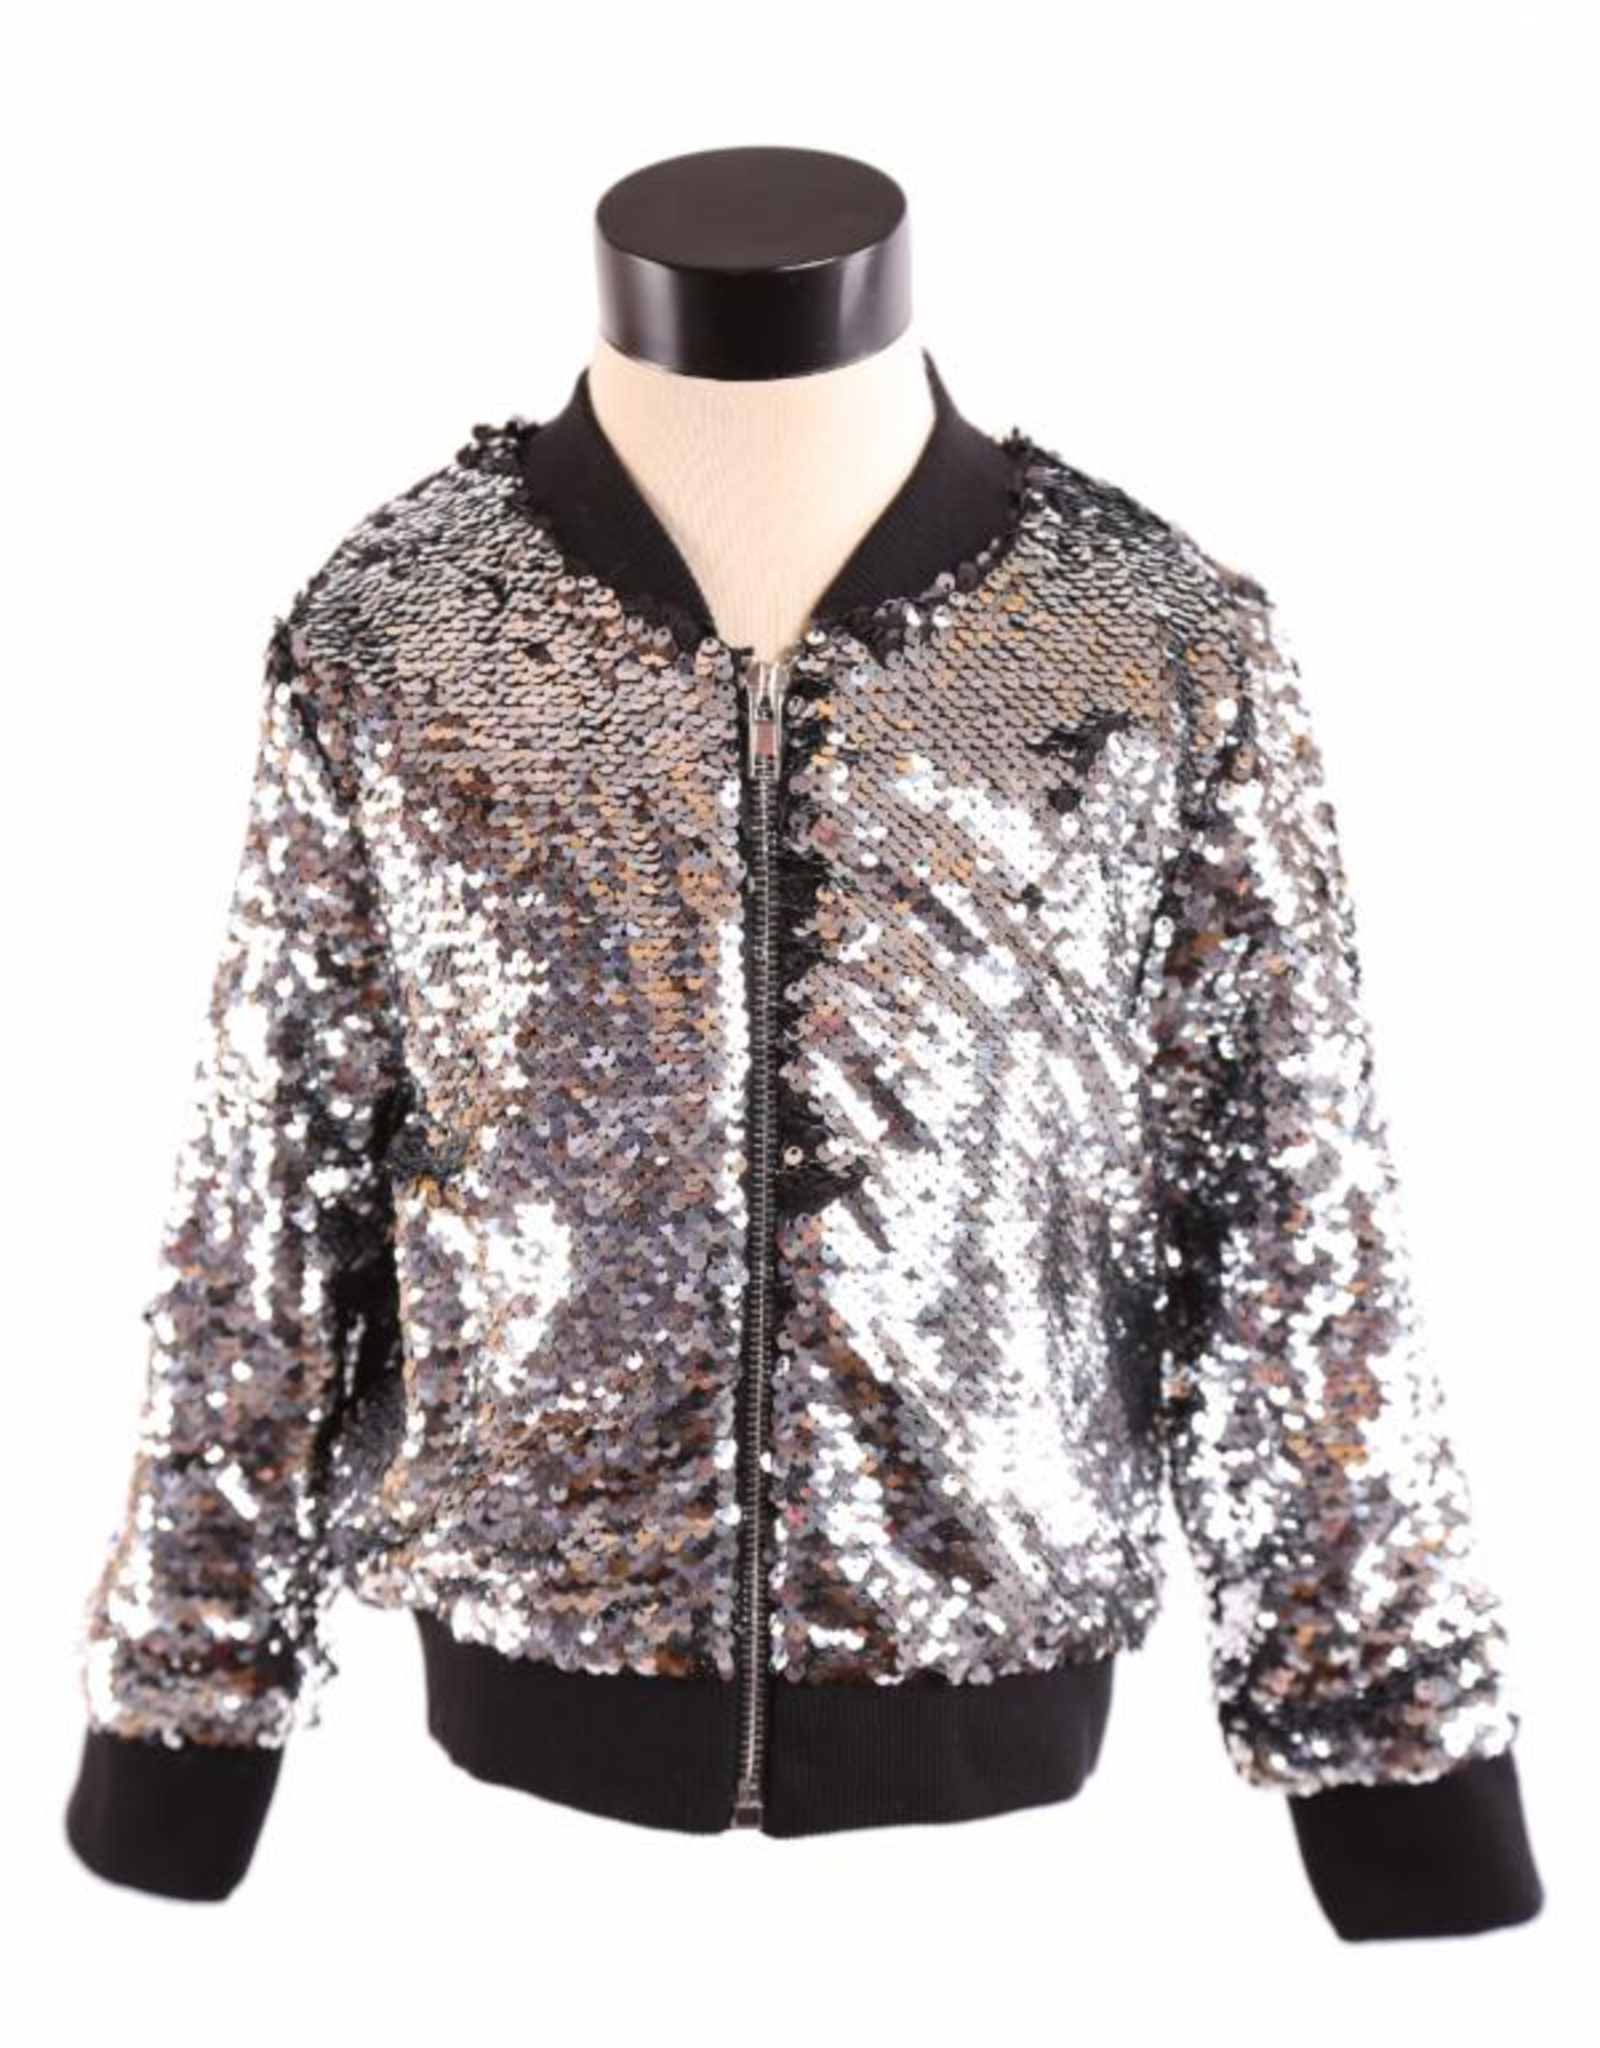 L/S Allover Sequin Zip-Up Jacket Silver